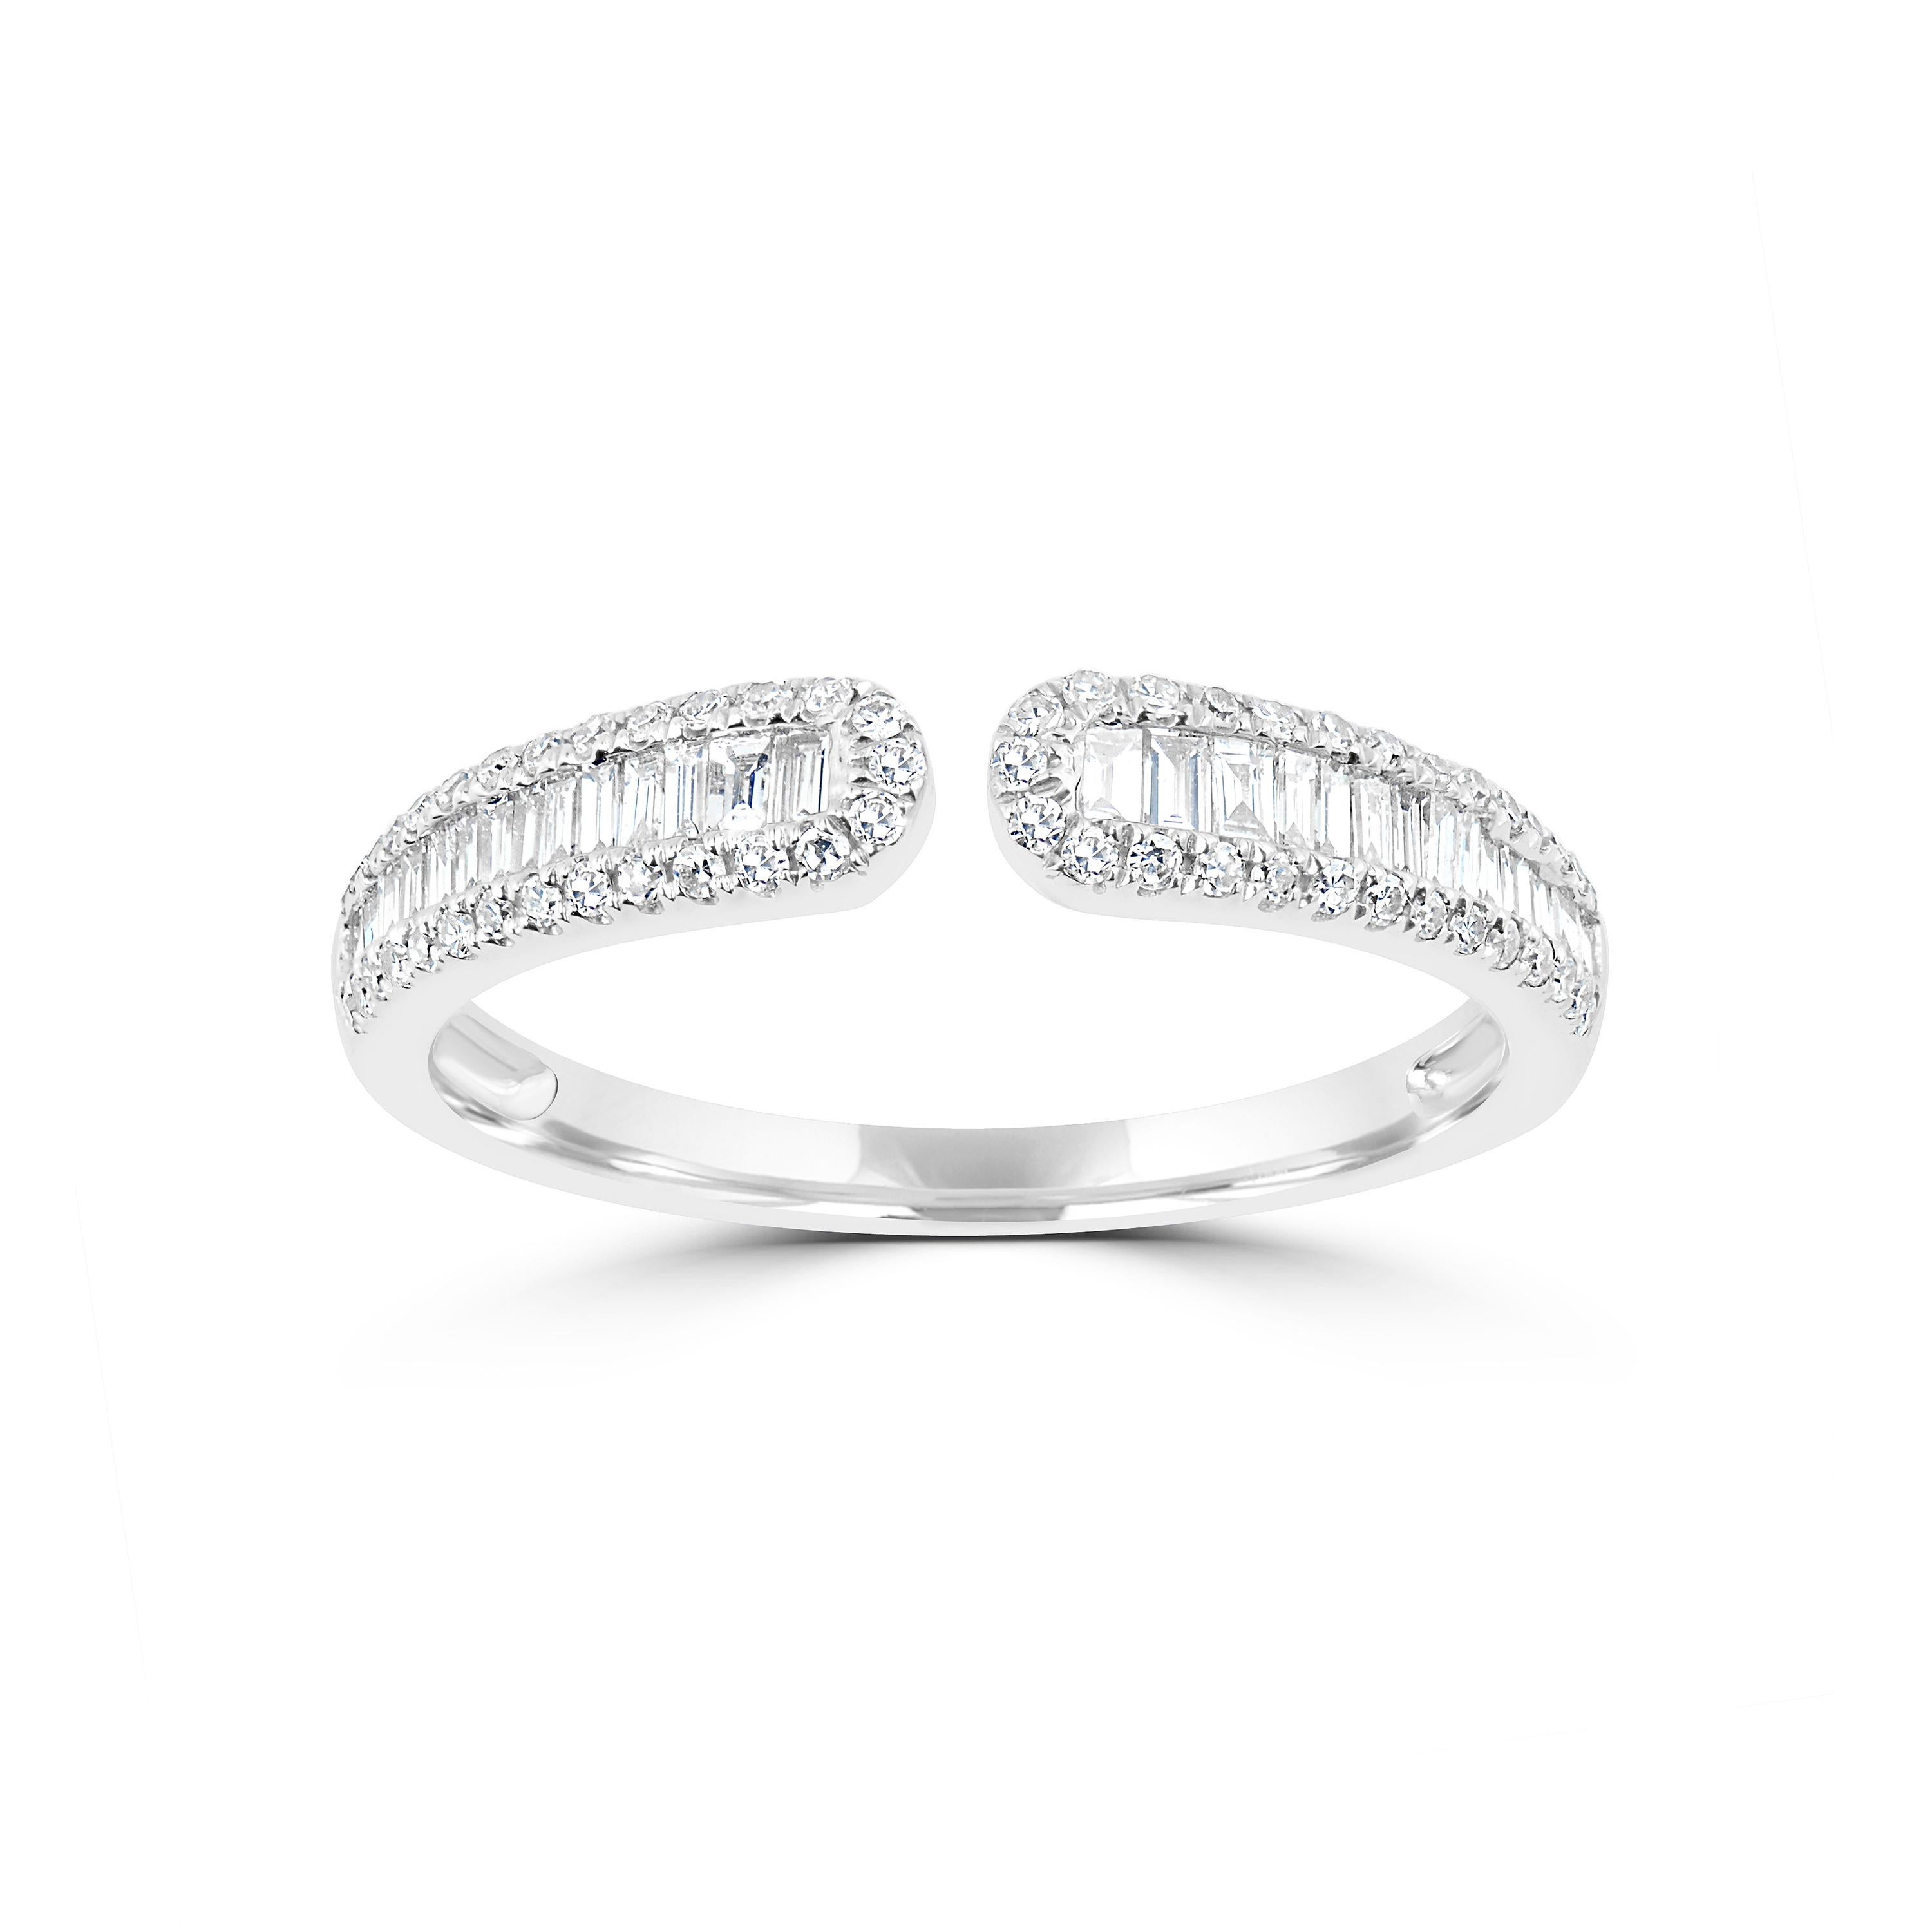 This ring is full of sparkle and style. Crafted by Luxle in 14K white gold it consists of 20 baguette diamonds and 58 round diamonds.
Please follow the Luxury Jewels storefront to view the latest collections & exclusive one of a kind pieces. Luxury